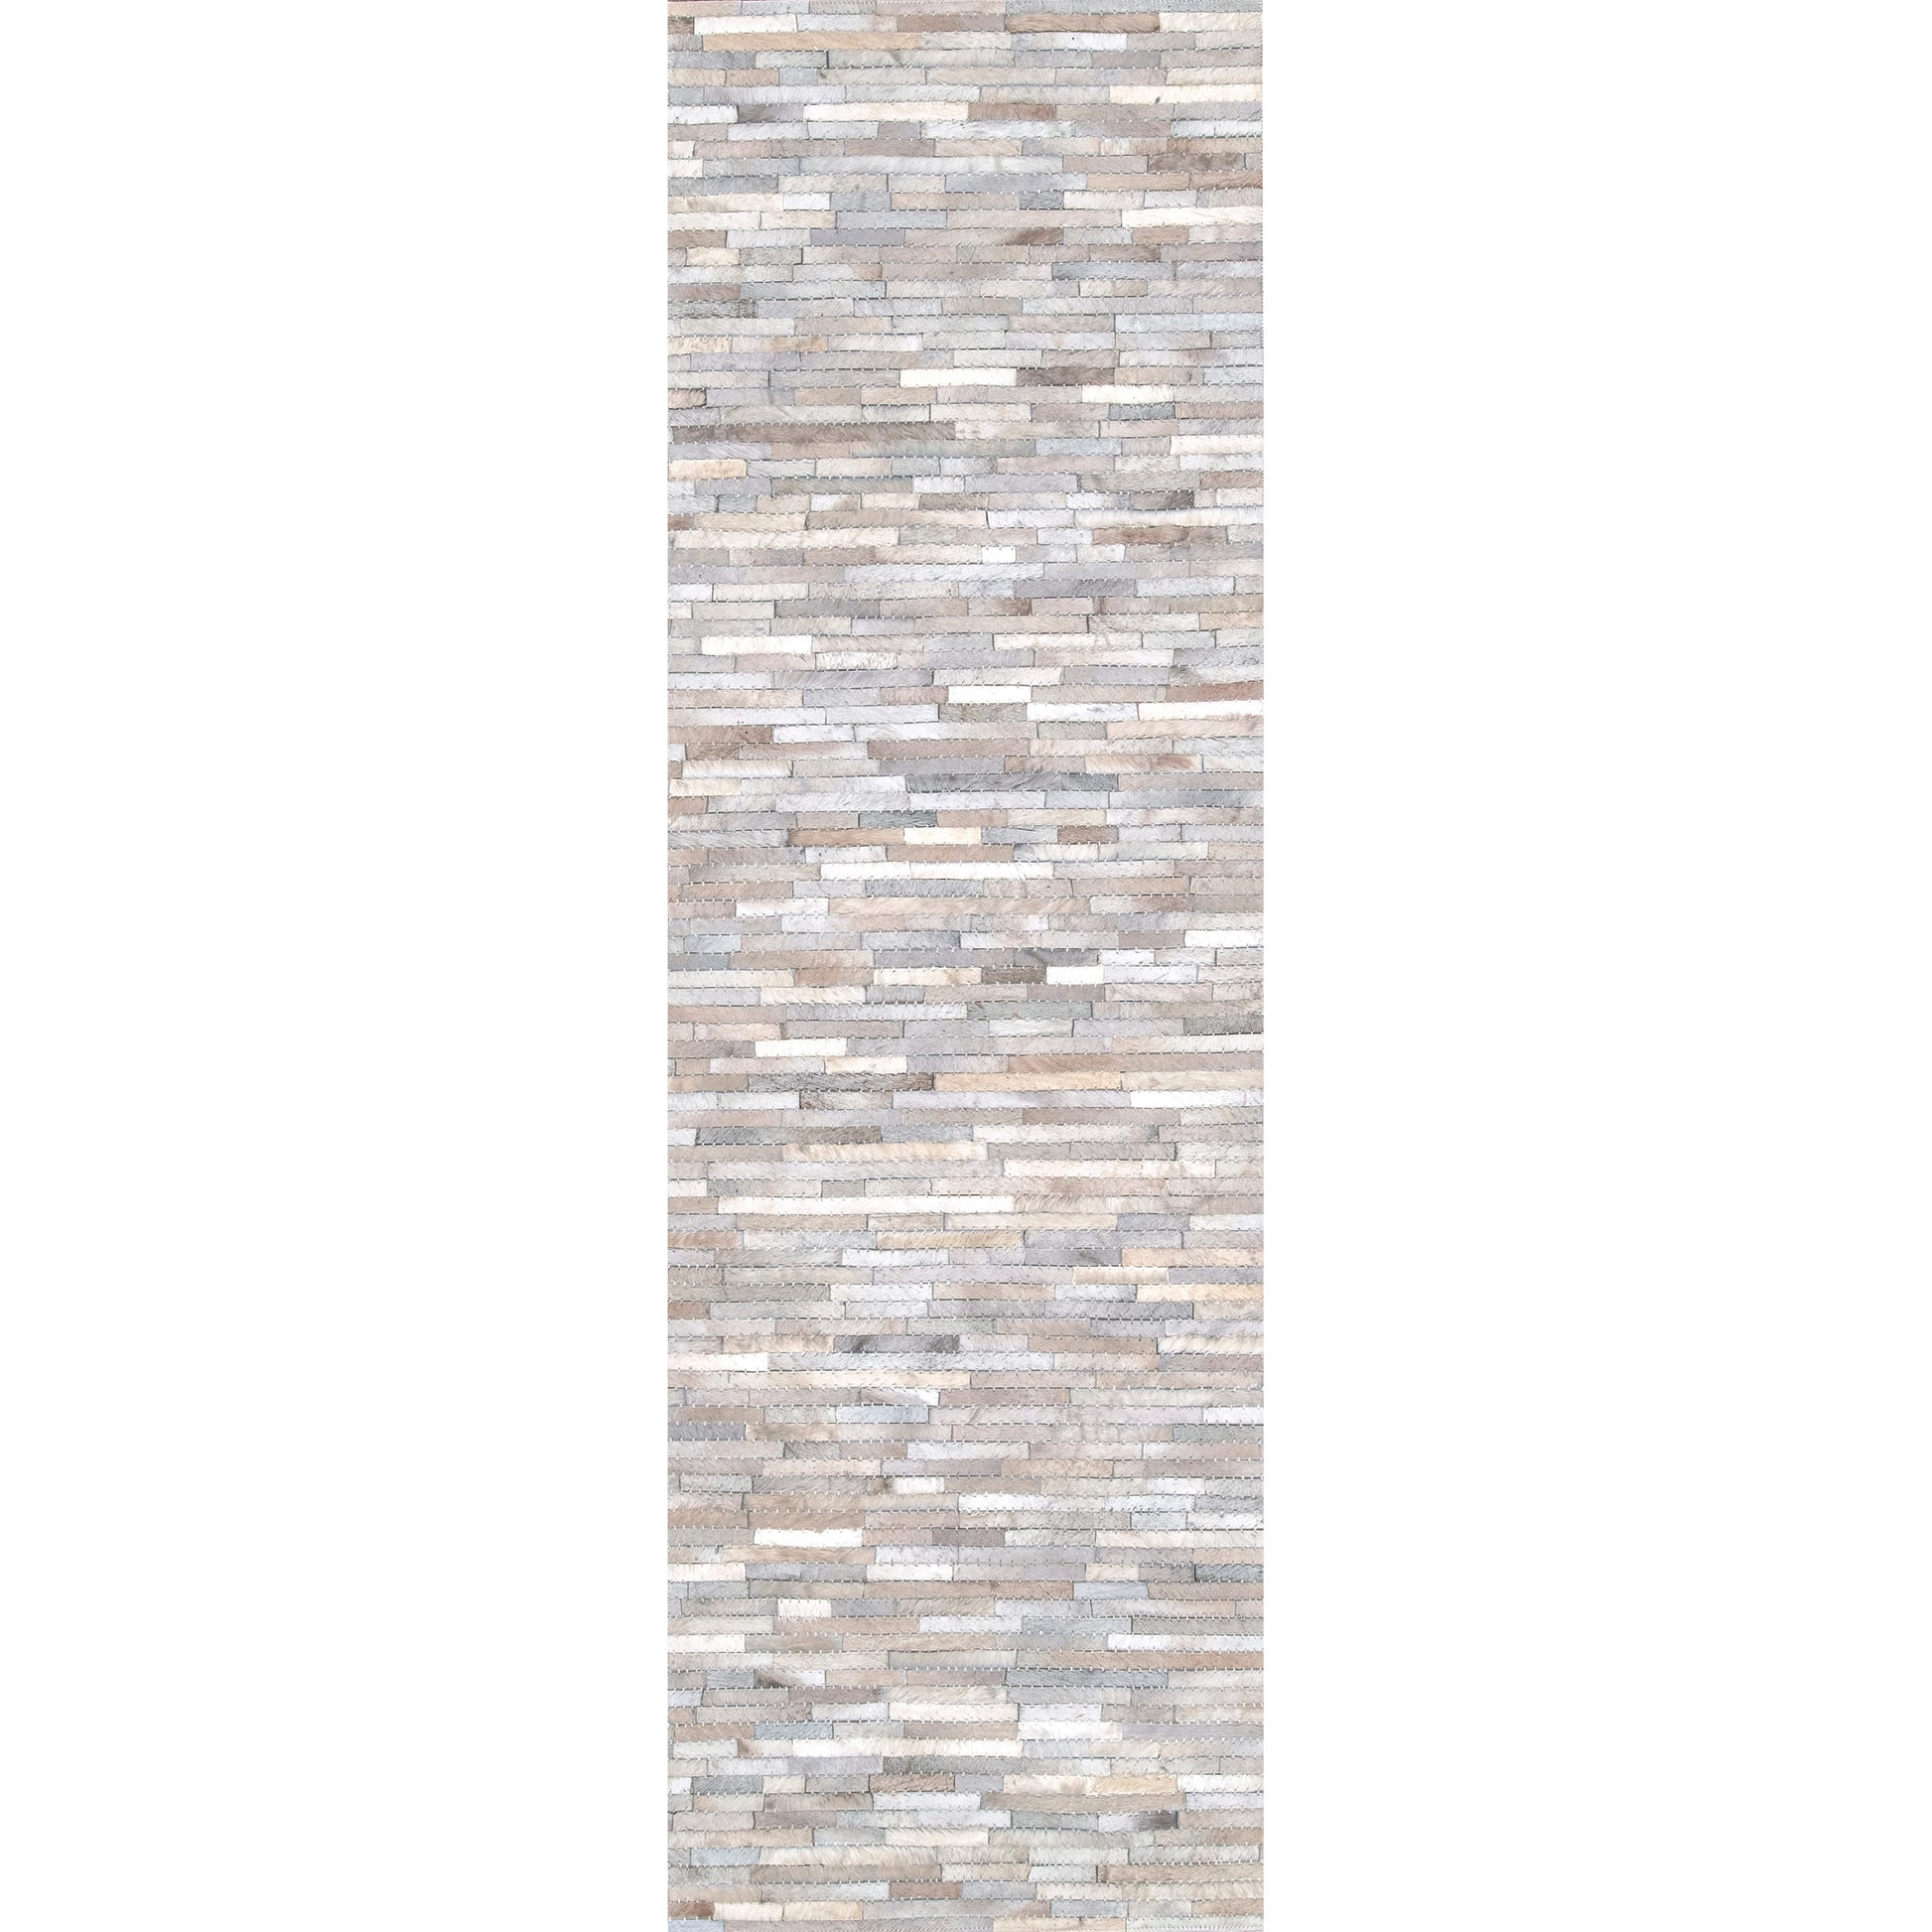 Nuloom Clarity Patchwork Cowhide Ncl3288A Beige Area Rug